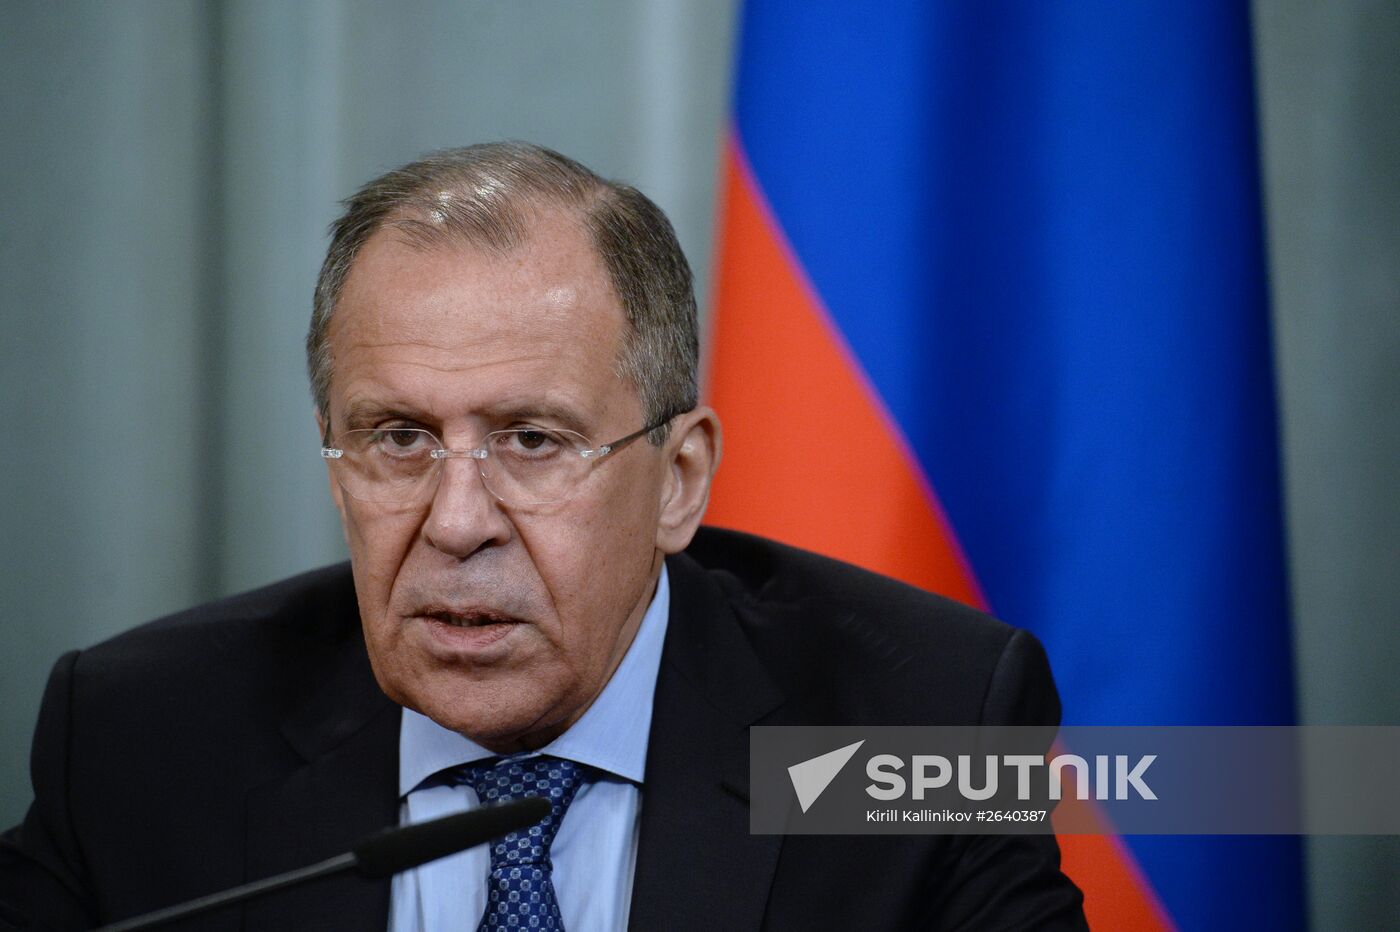 Russian Foreign Minister Sergei Lavrov meets with OIC Secretary-General Iyad bin Amin Madani